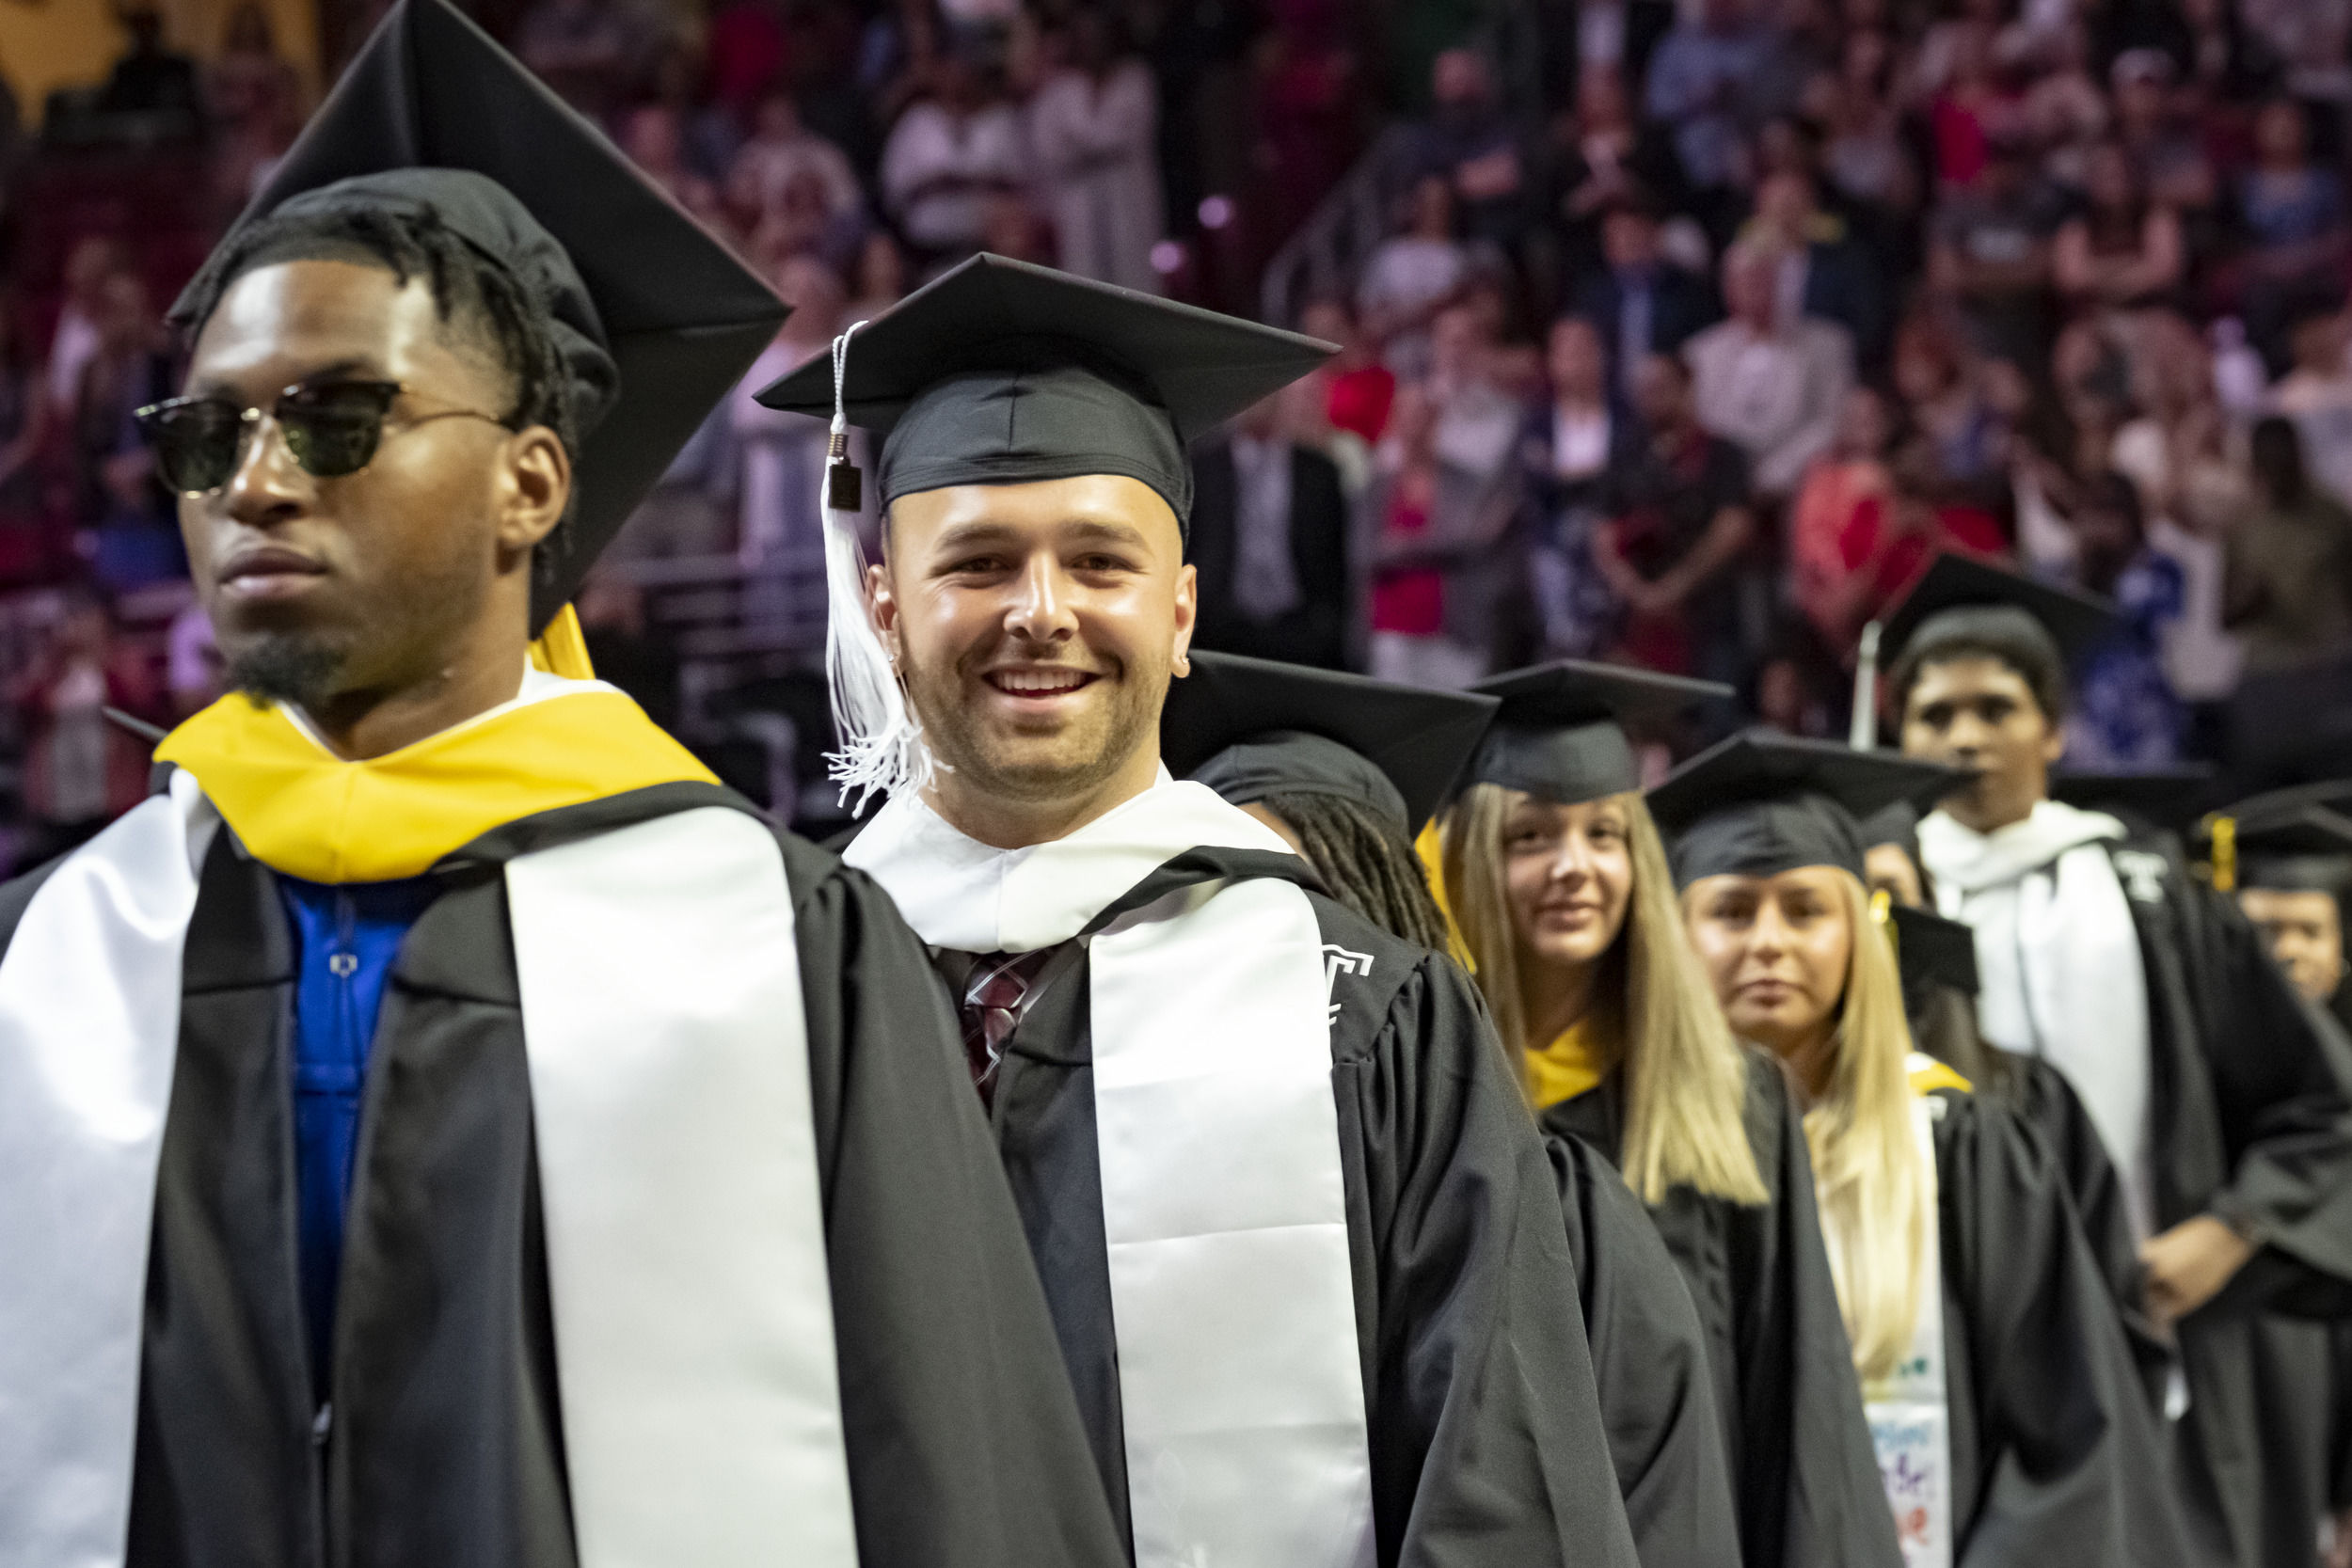 Graduating students in caps and gowns processing in Liacouras Center